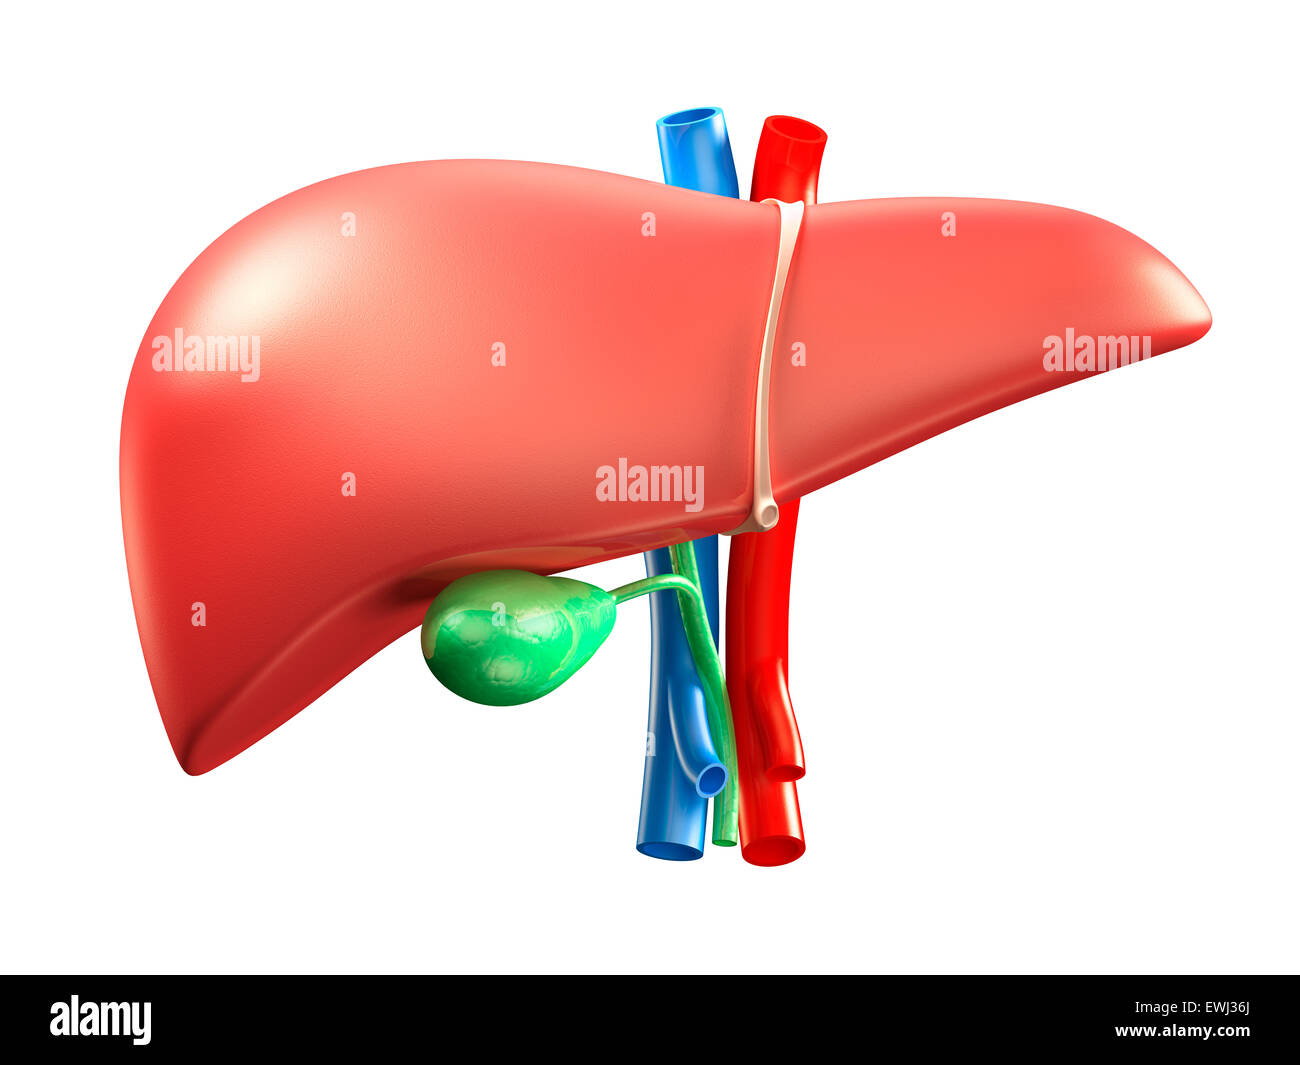 Liver and gallbladder colorful 3D illustration isolated on white background Stock Photo